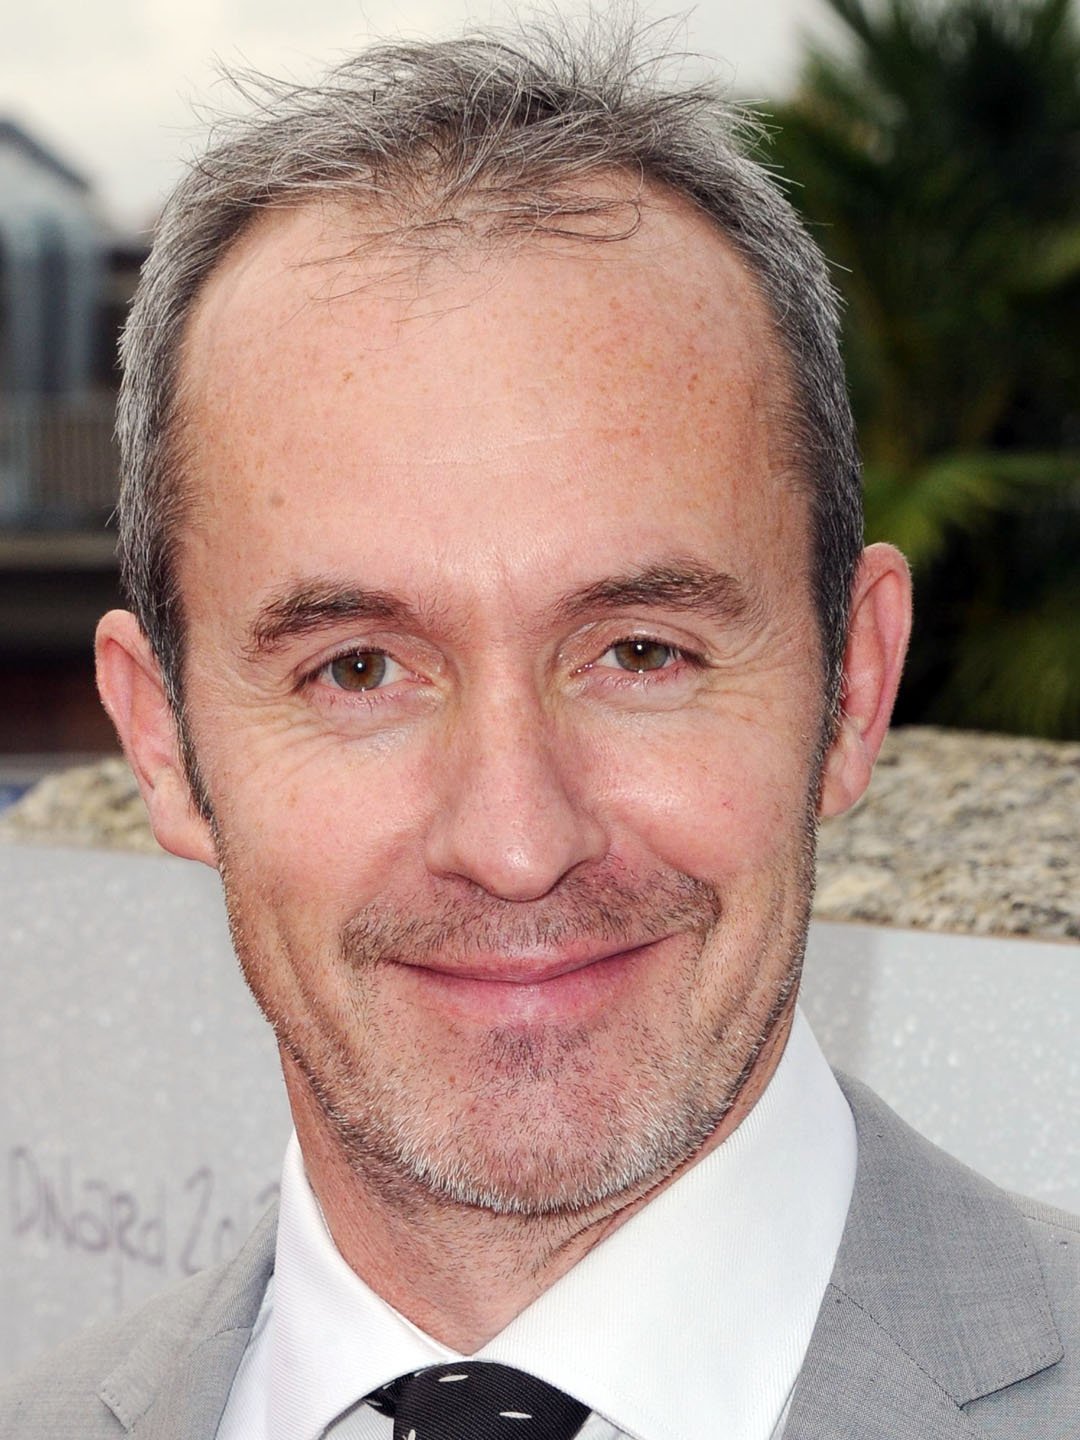 How tall is Stephen Dillane?